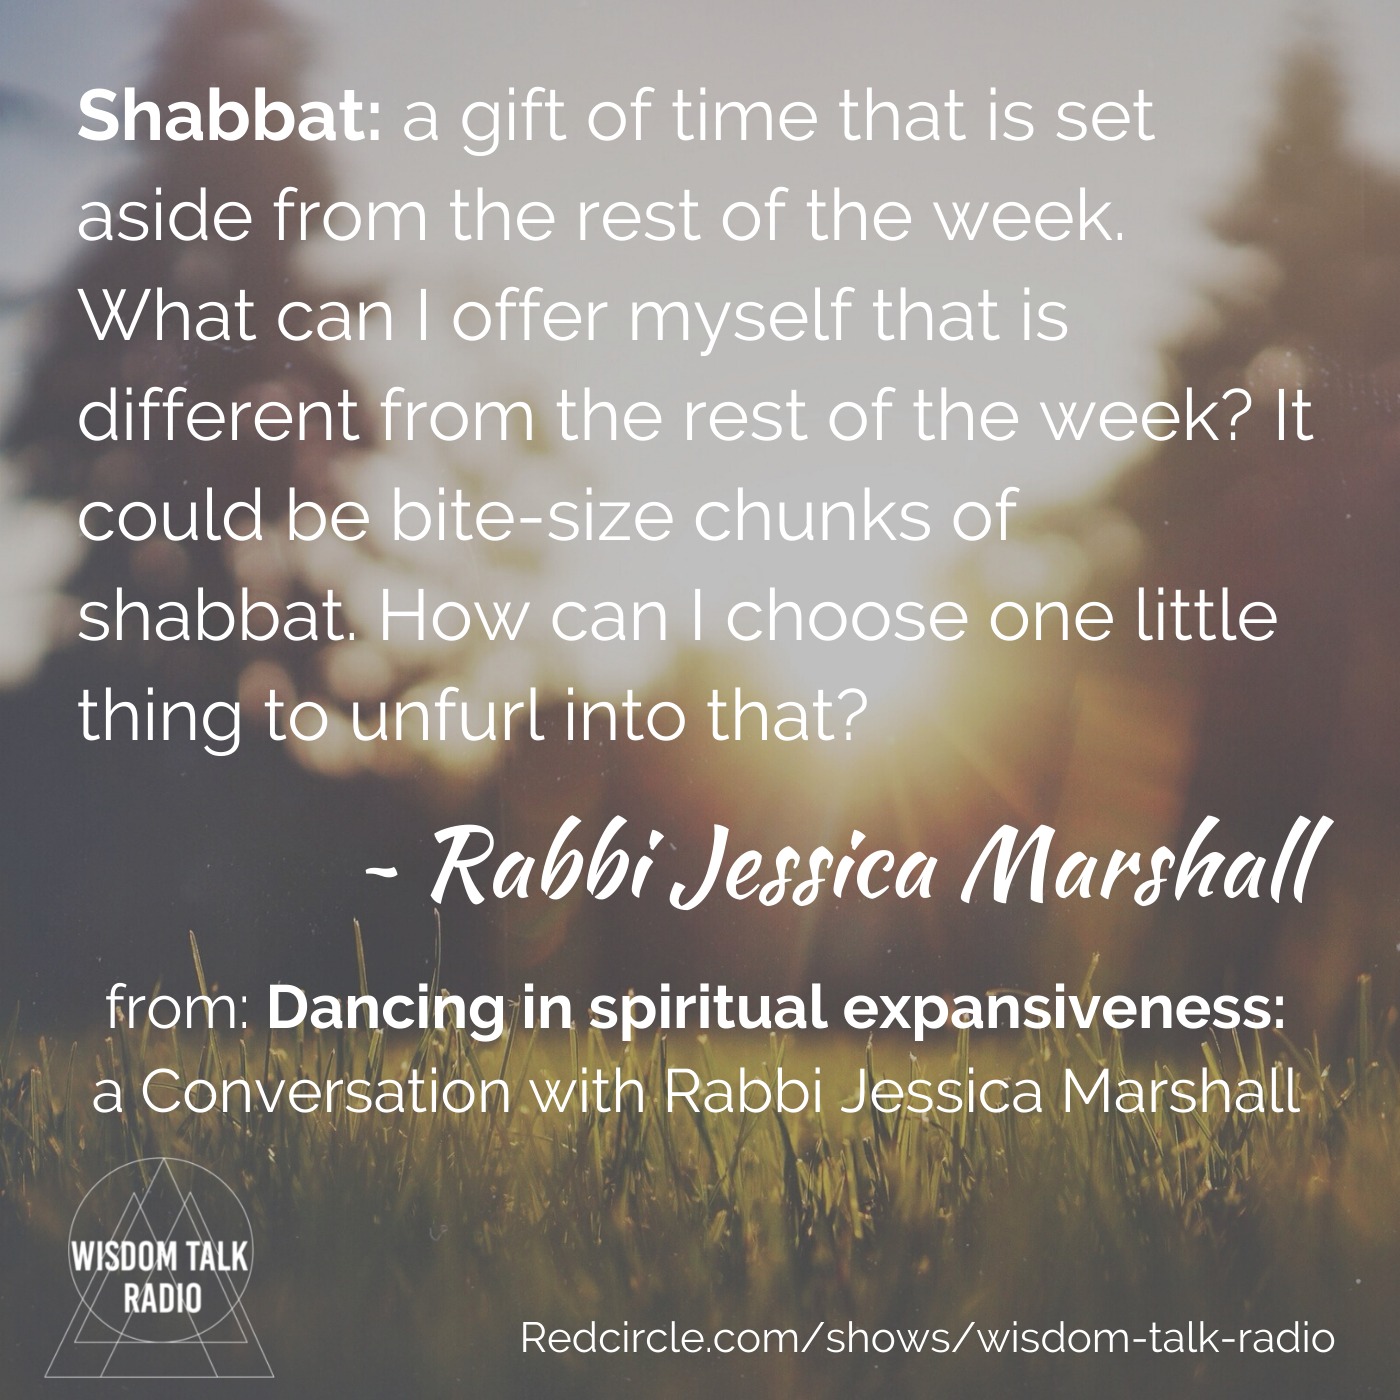 Dancing in spiritual expansiveness: a conversation with Rabbi Jessica Marshall